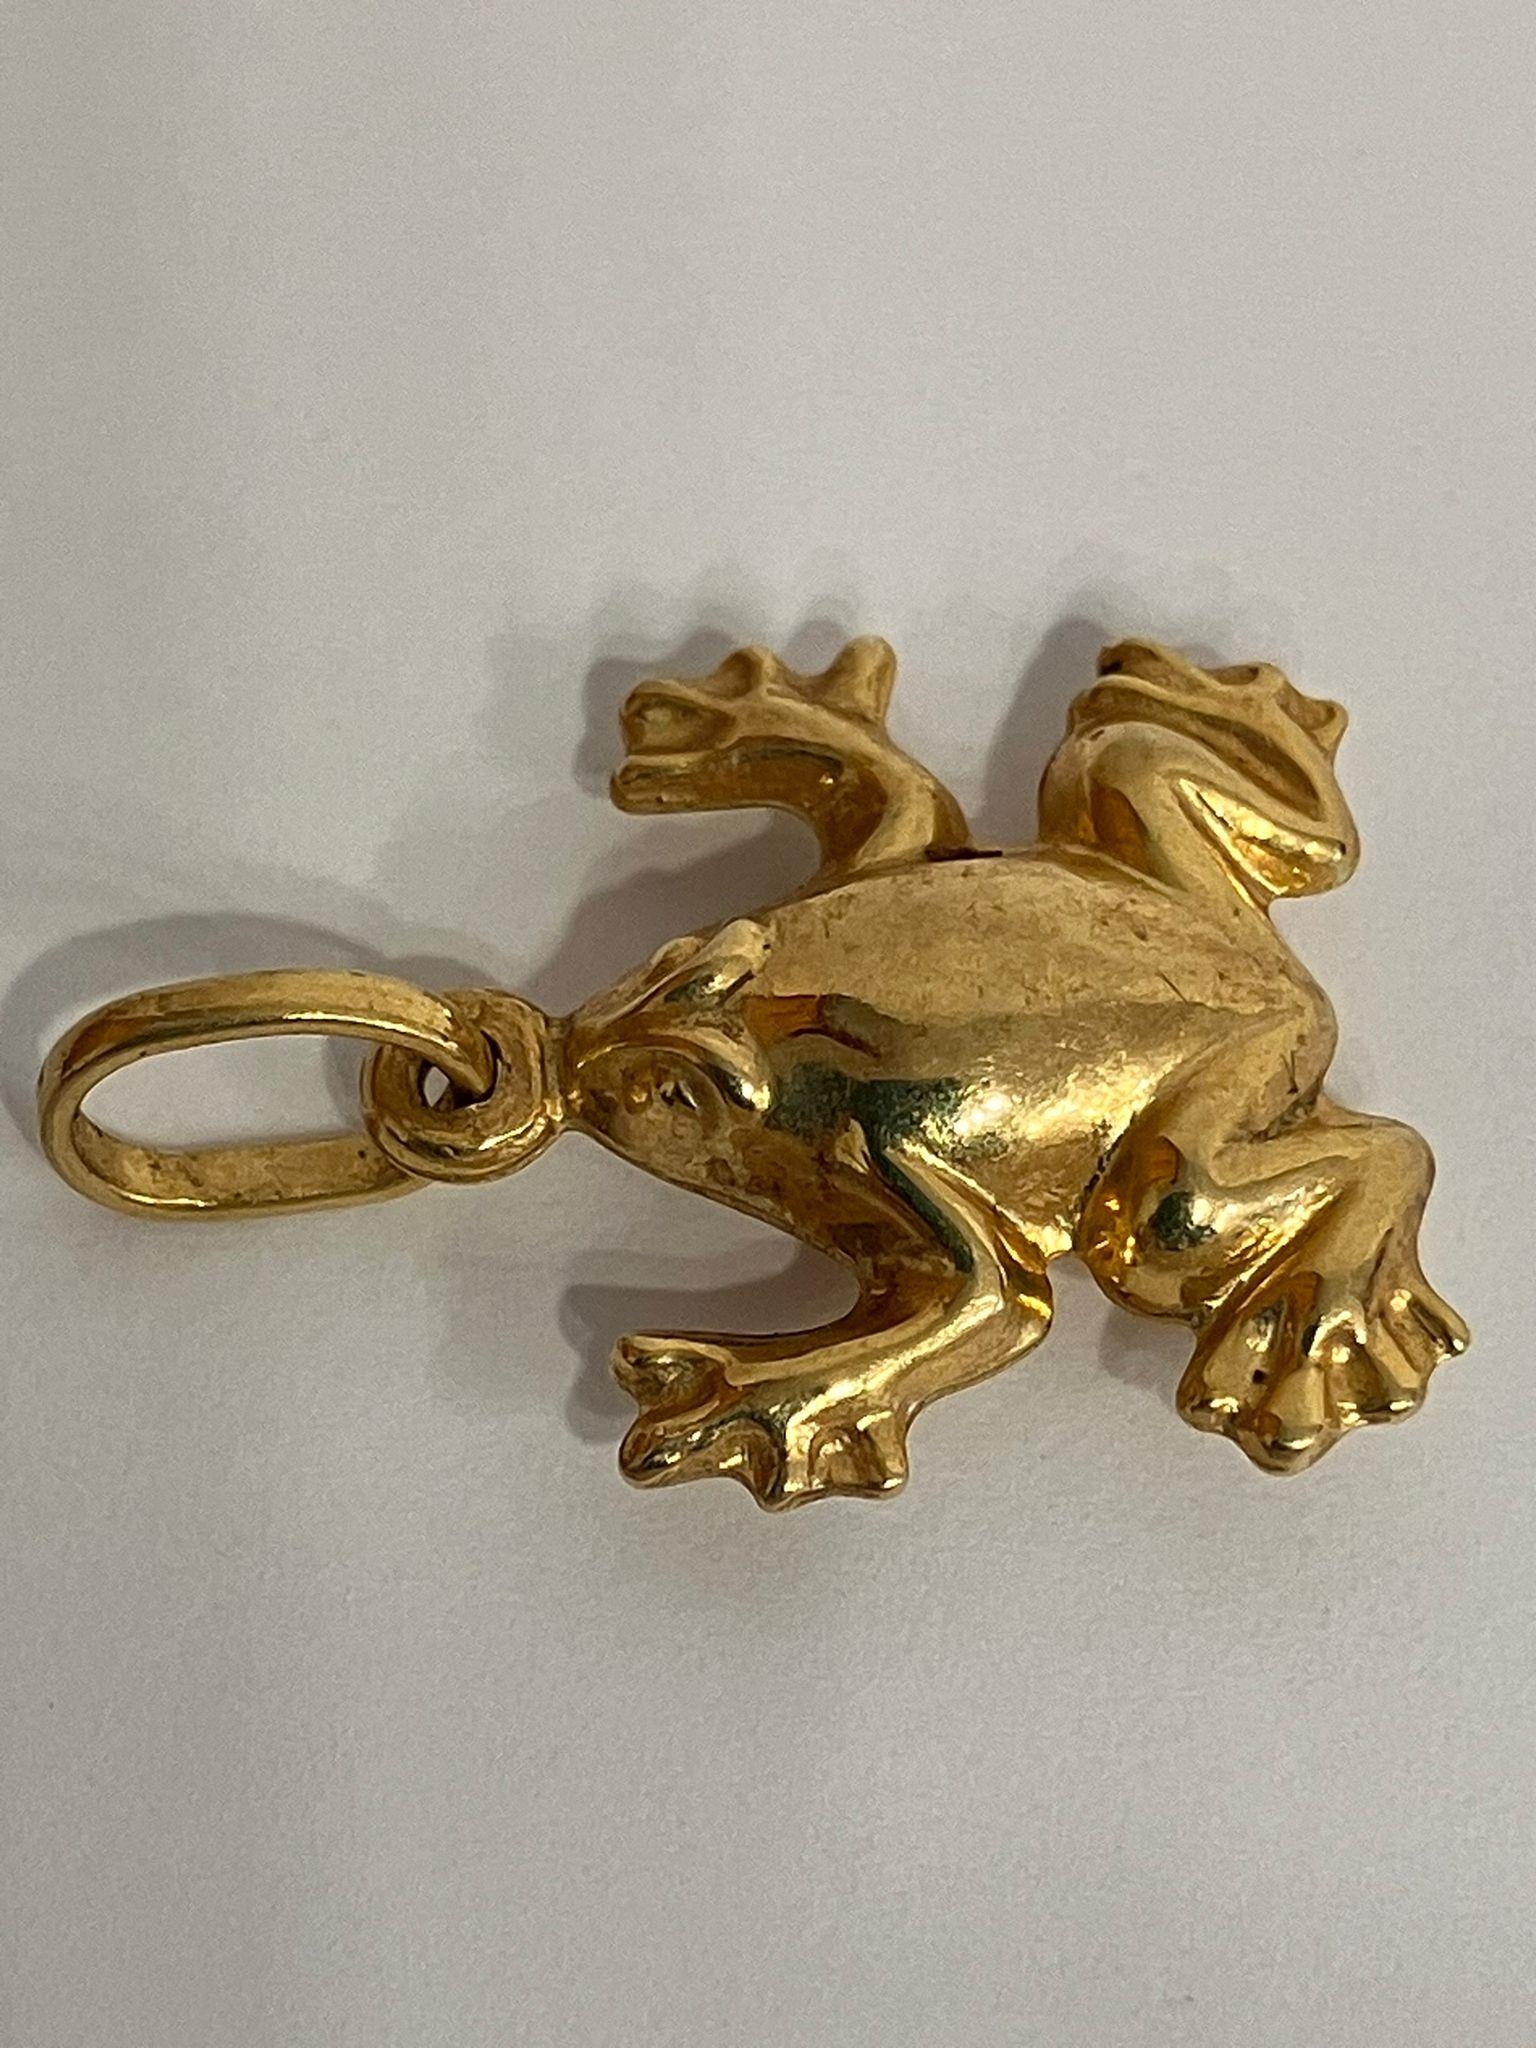 9 carat GOLD, FROG CHARM. 1.04 grams. - Image 2 of 3